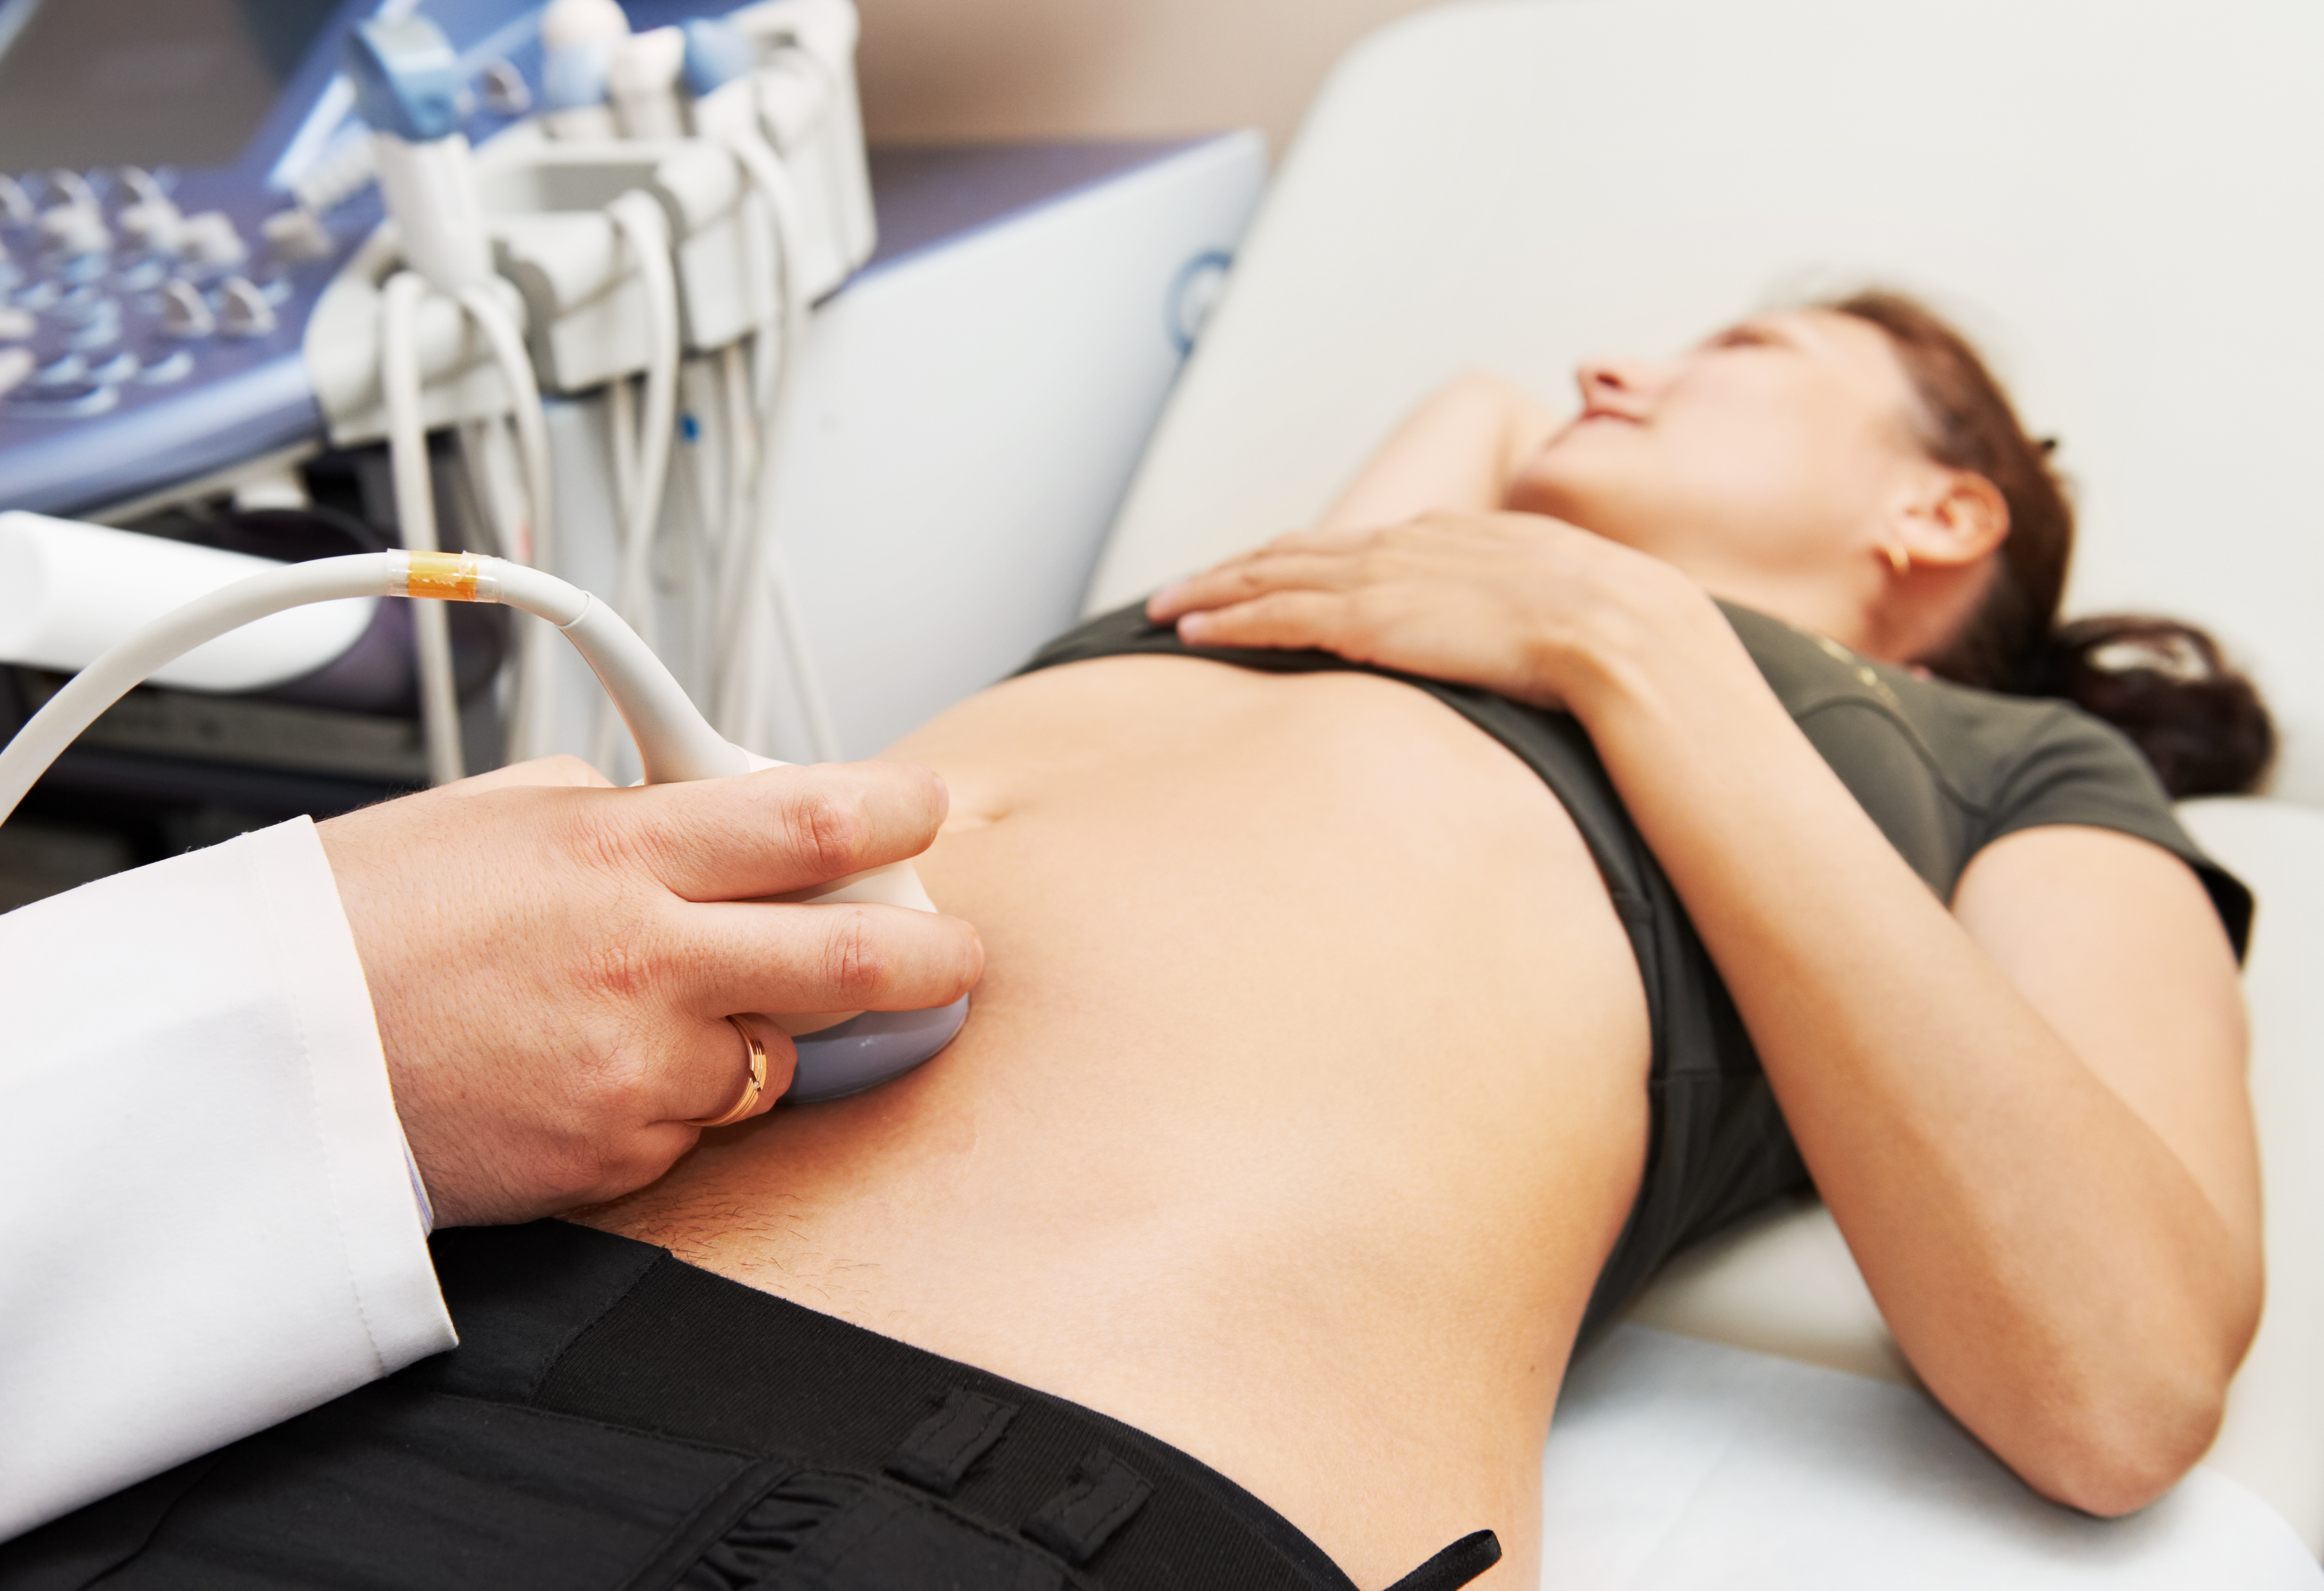 Ultrasound examination of a woman